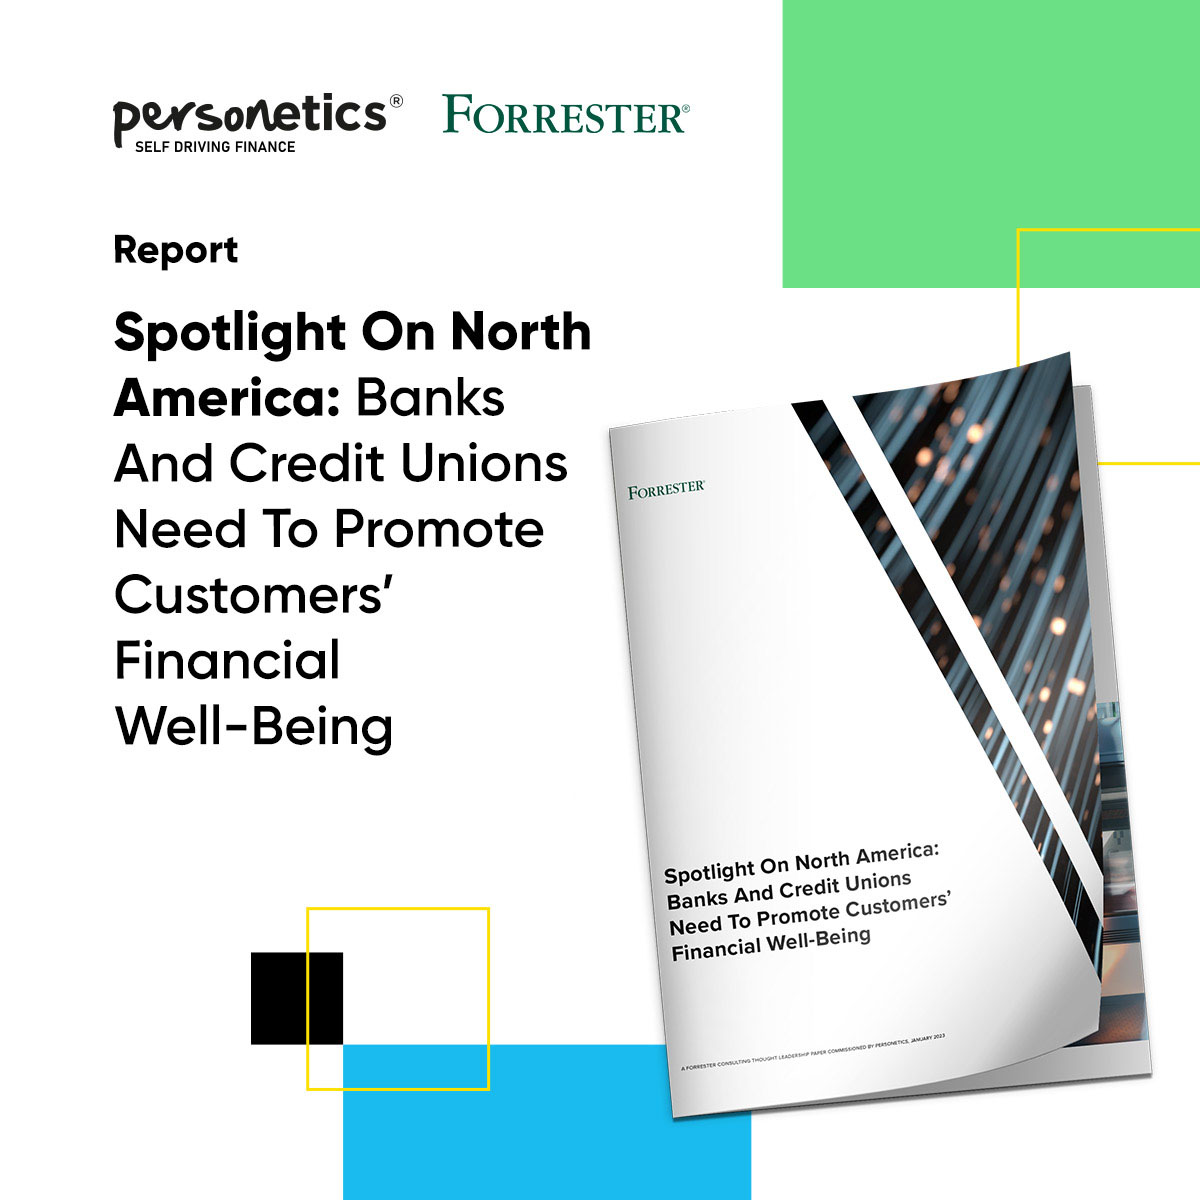 Forrester report commisioned by Personetics